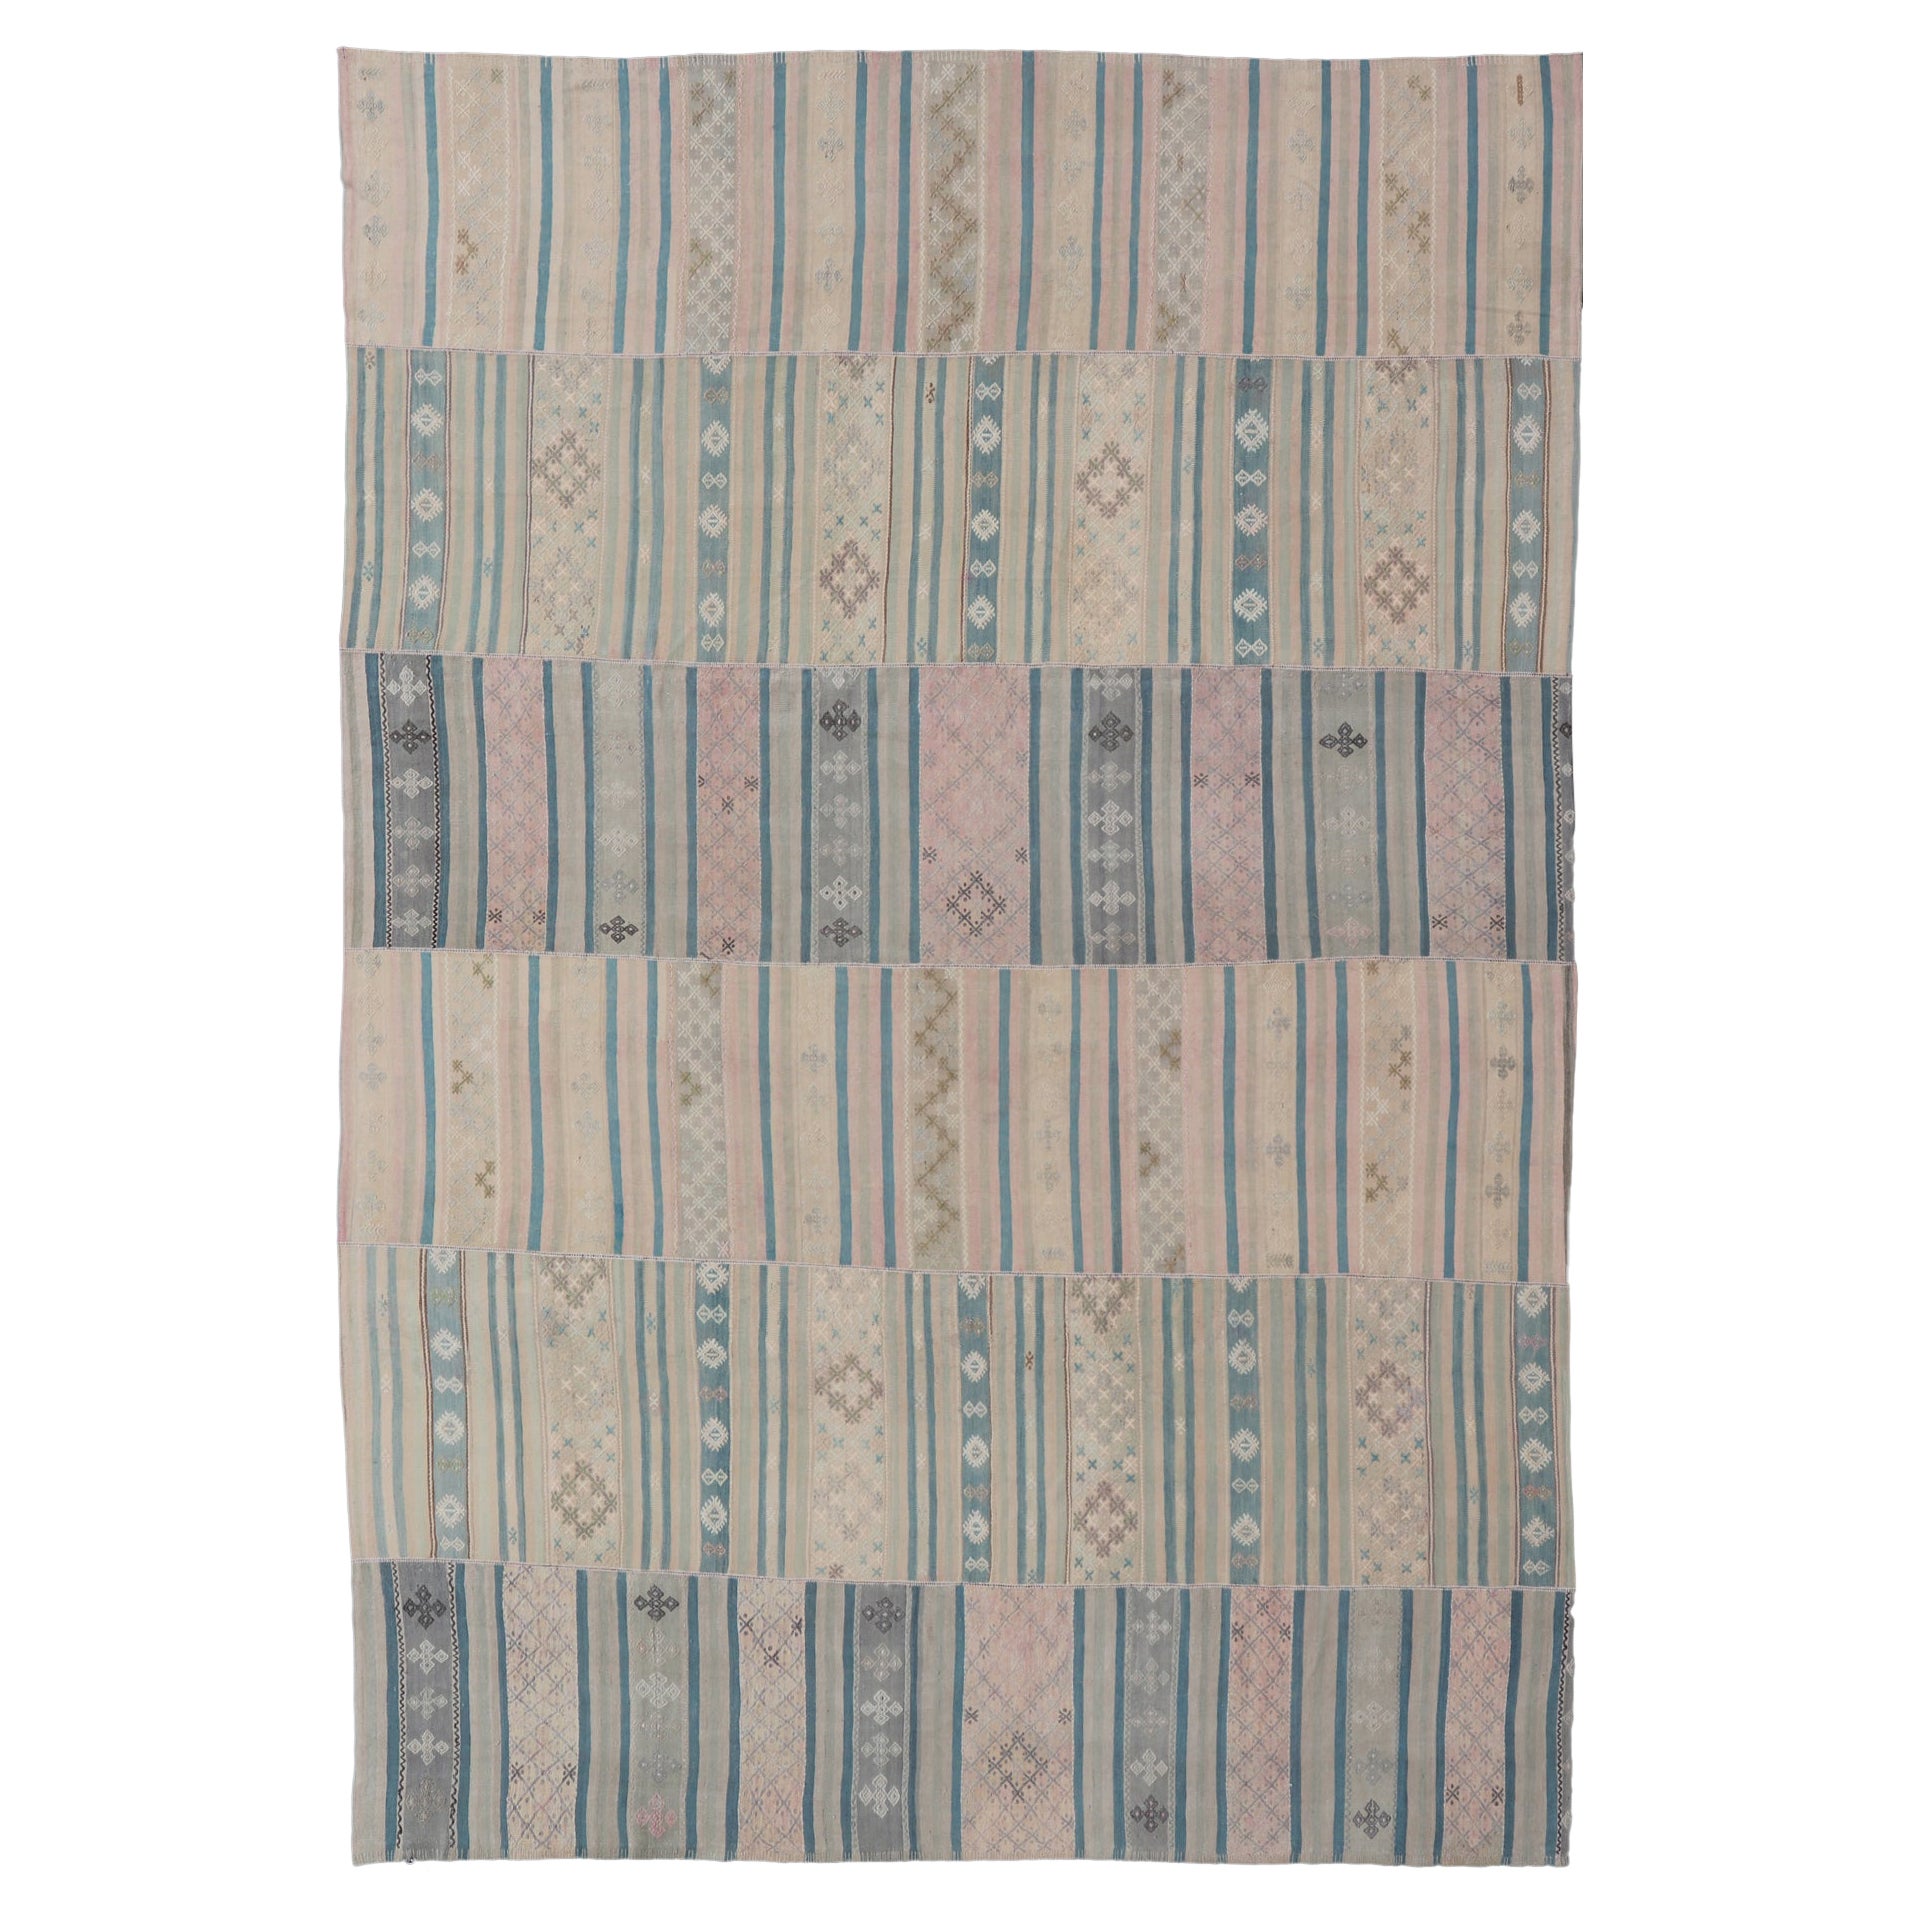 Large Vintage Paneled Kilim Flat-Weave in Blue, Pink, Taupe, Gray, Light Brown For Sale